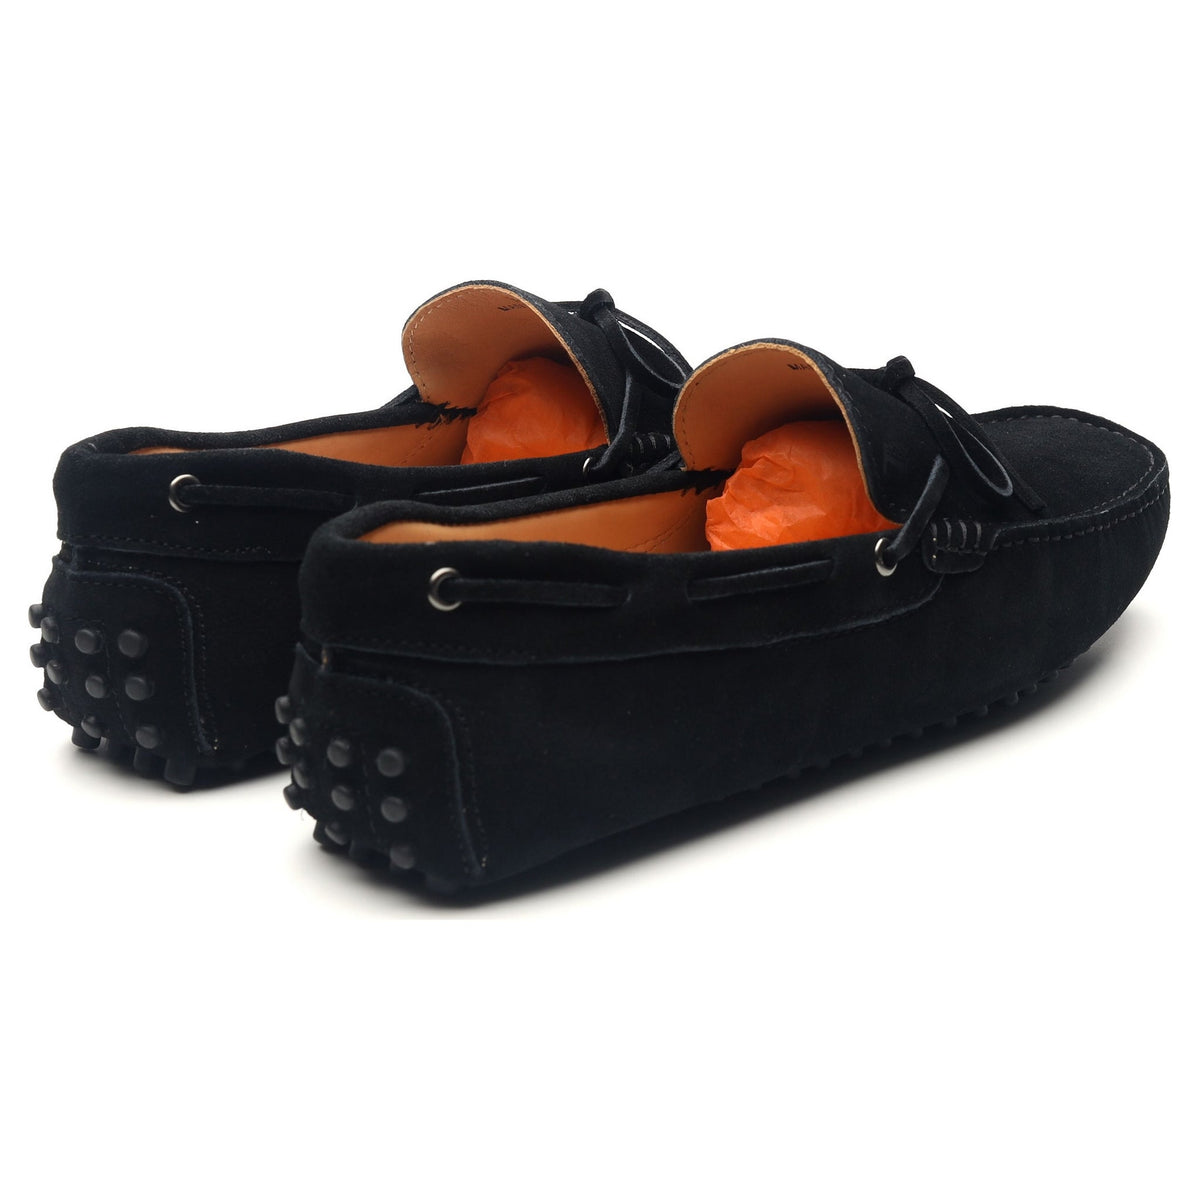 Gommino Black Suede Driving Loafers UK 8